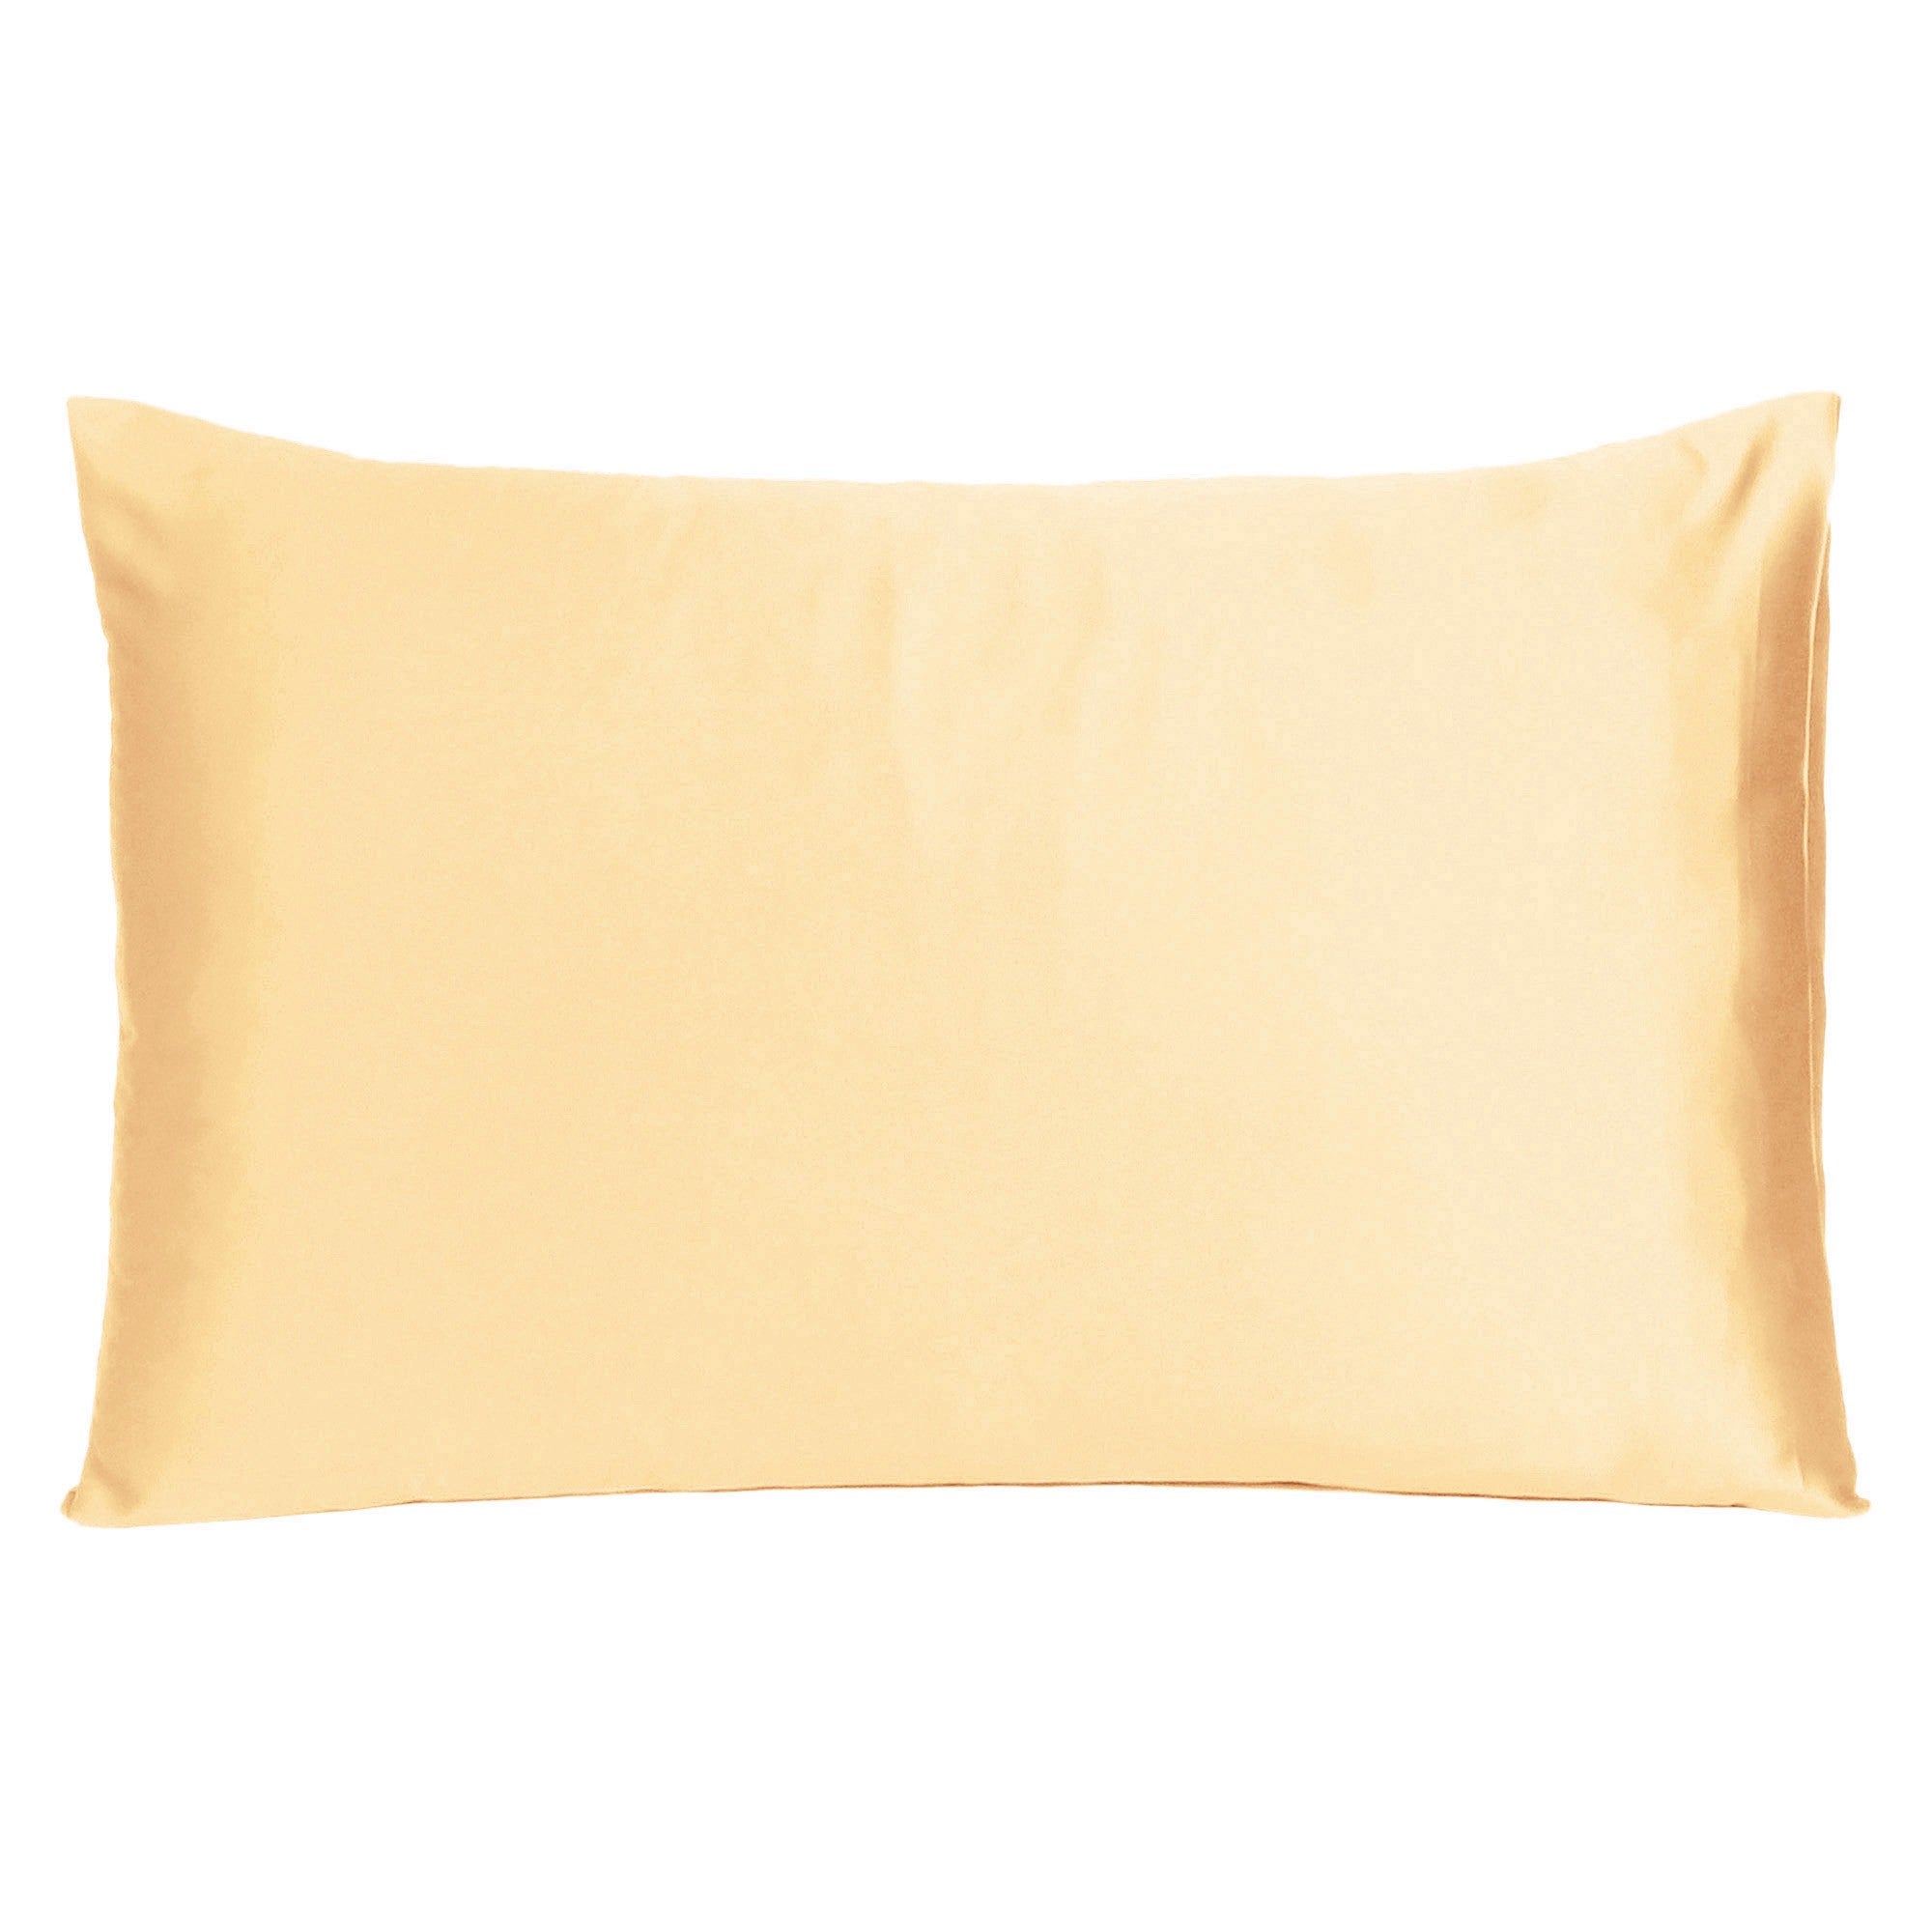 Pale Peach Dreamy Set Of 2 Silky Satin Standard Pillowcases - Tuesday Morning-Bed Sheets